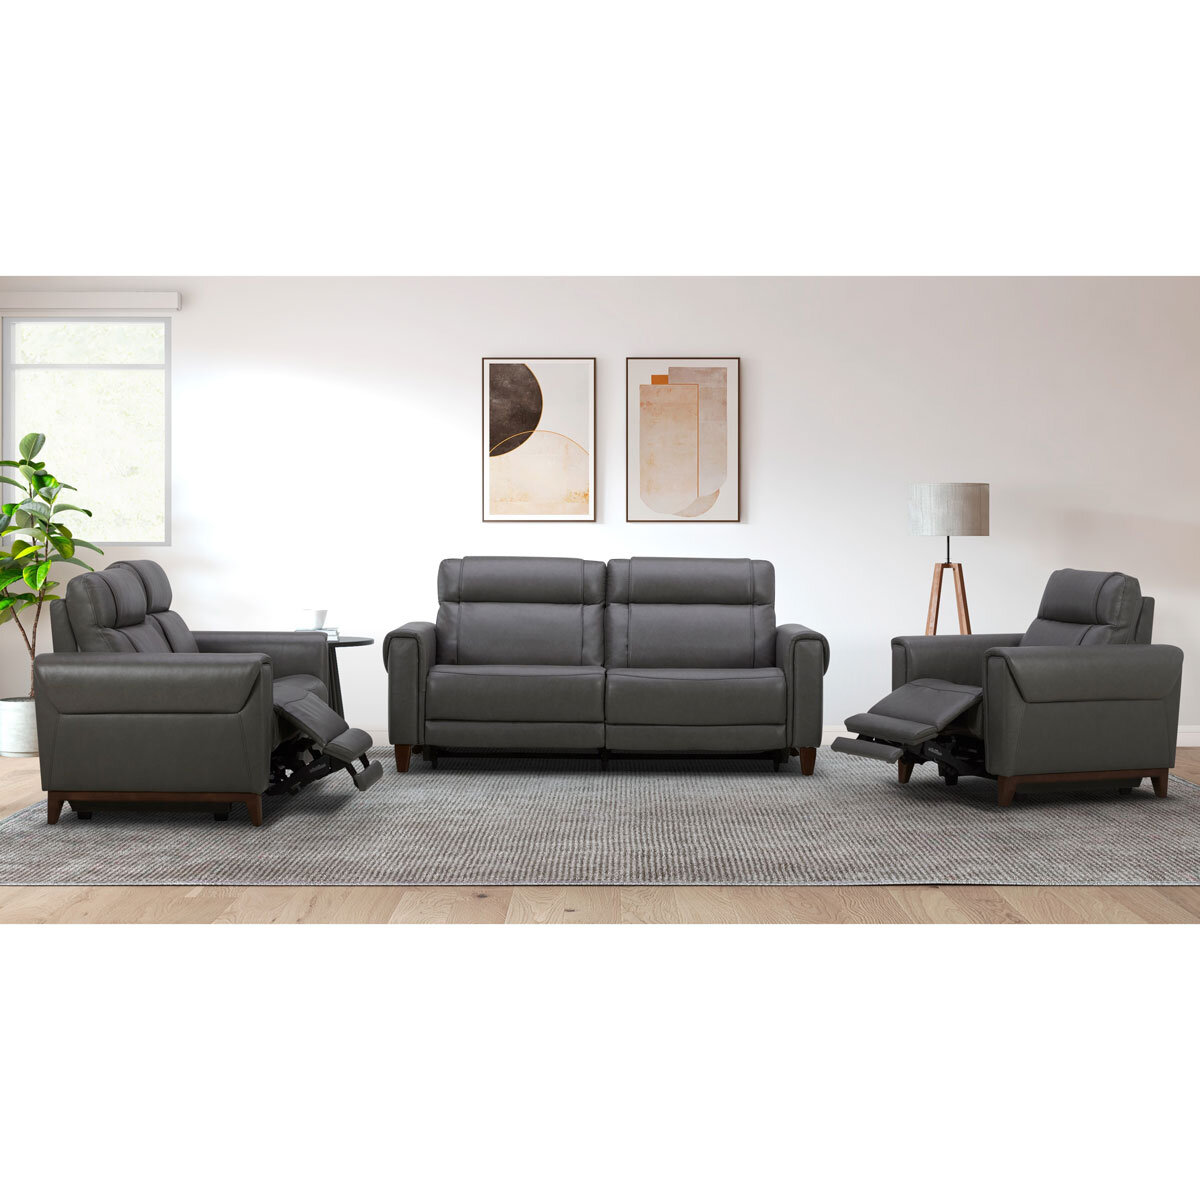 Aiden & Ivy Spencer Leather Recliner